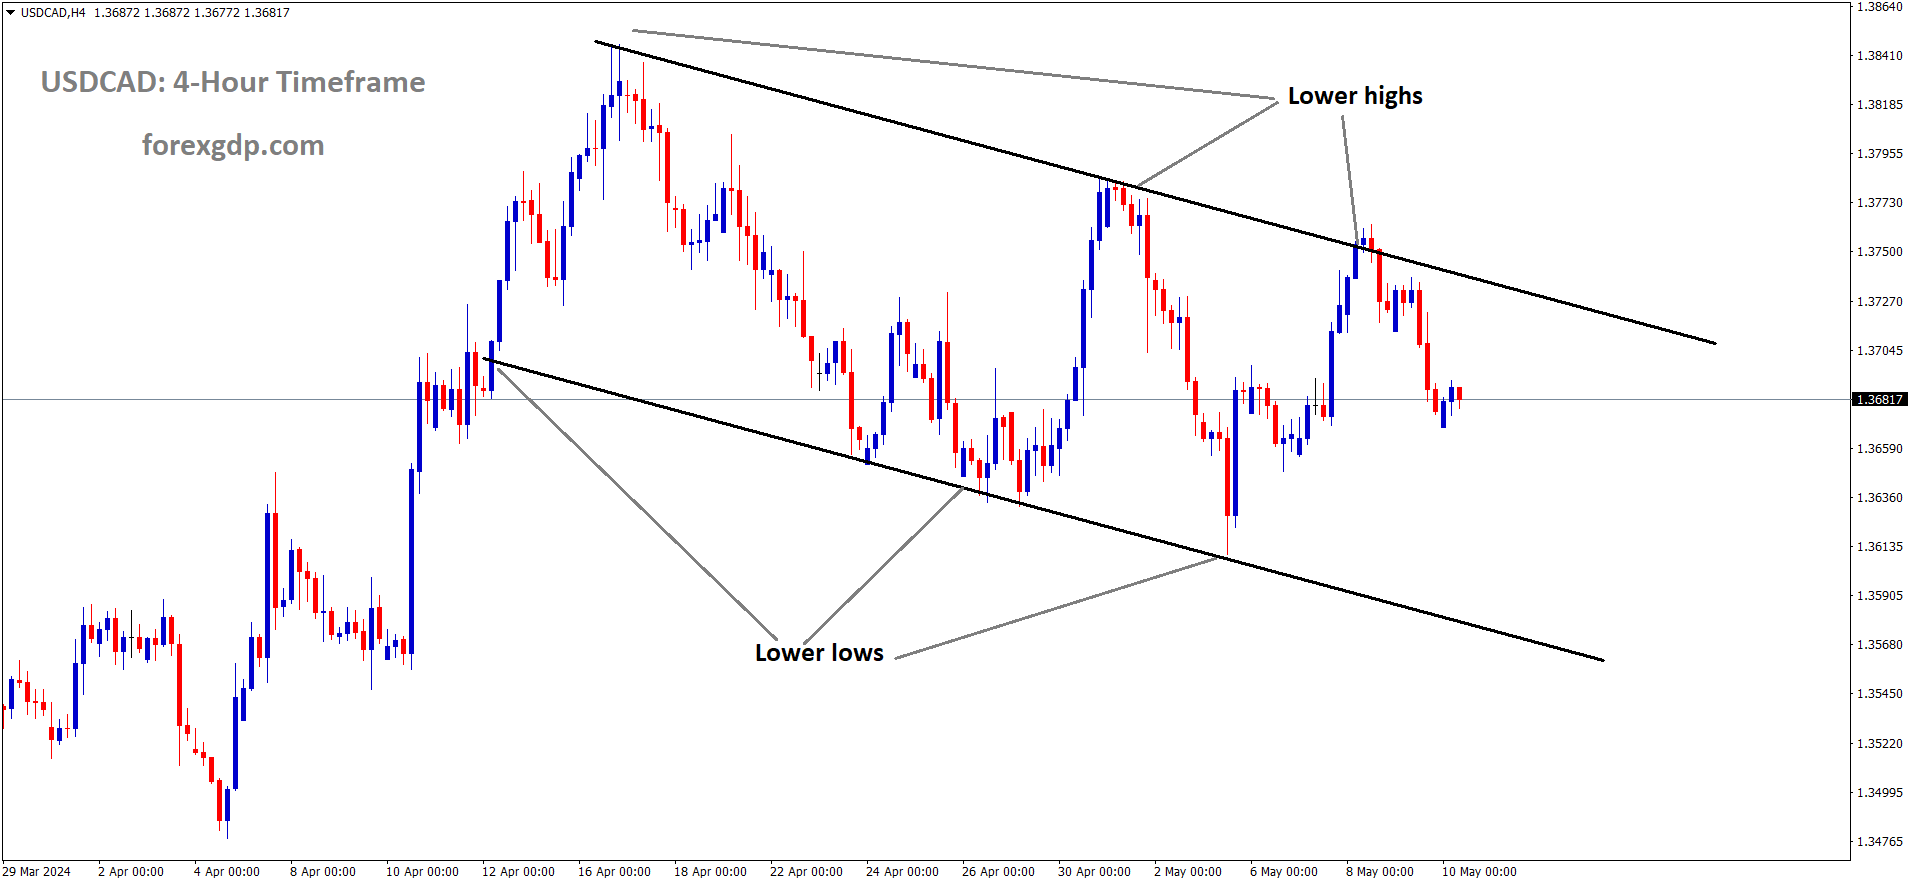 USDCAD is moving in the Descending channel and the market has fallen from lower high area of the channel